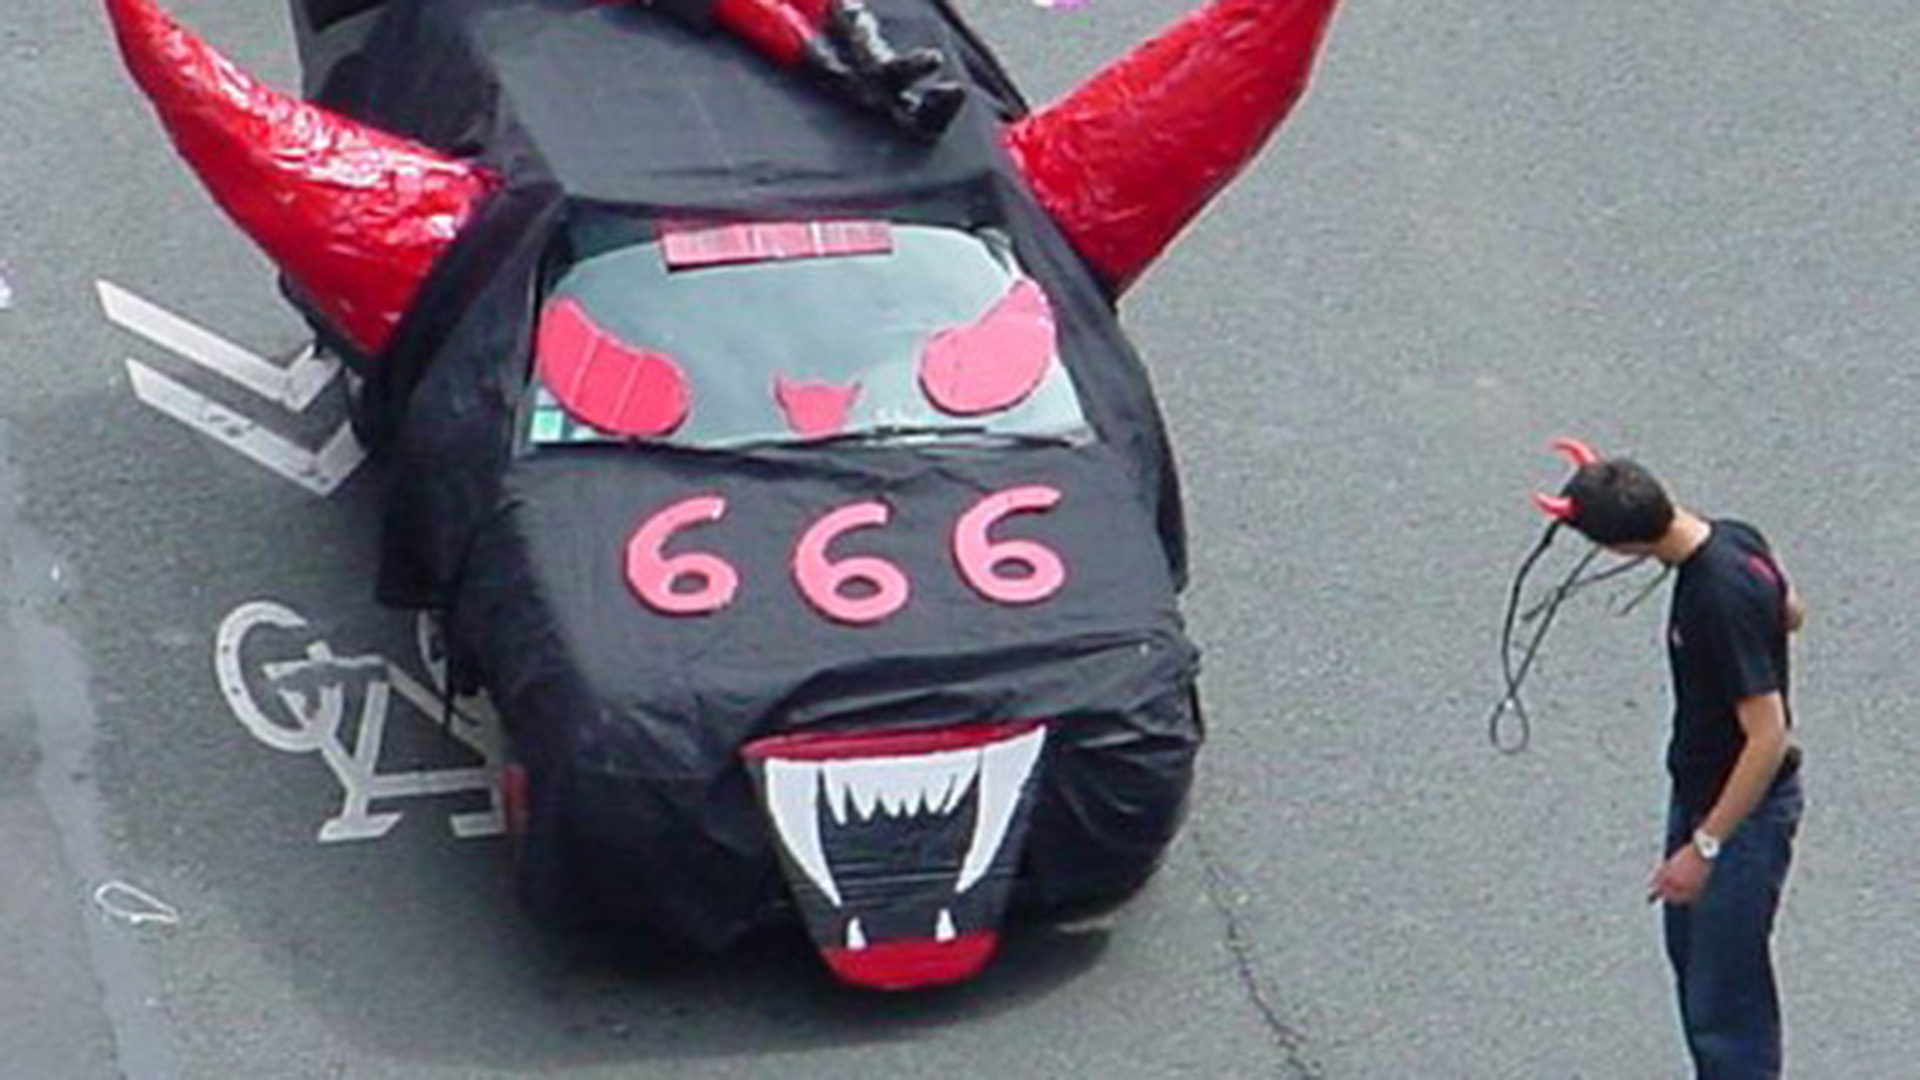 Number sequence 666 - number of the beast